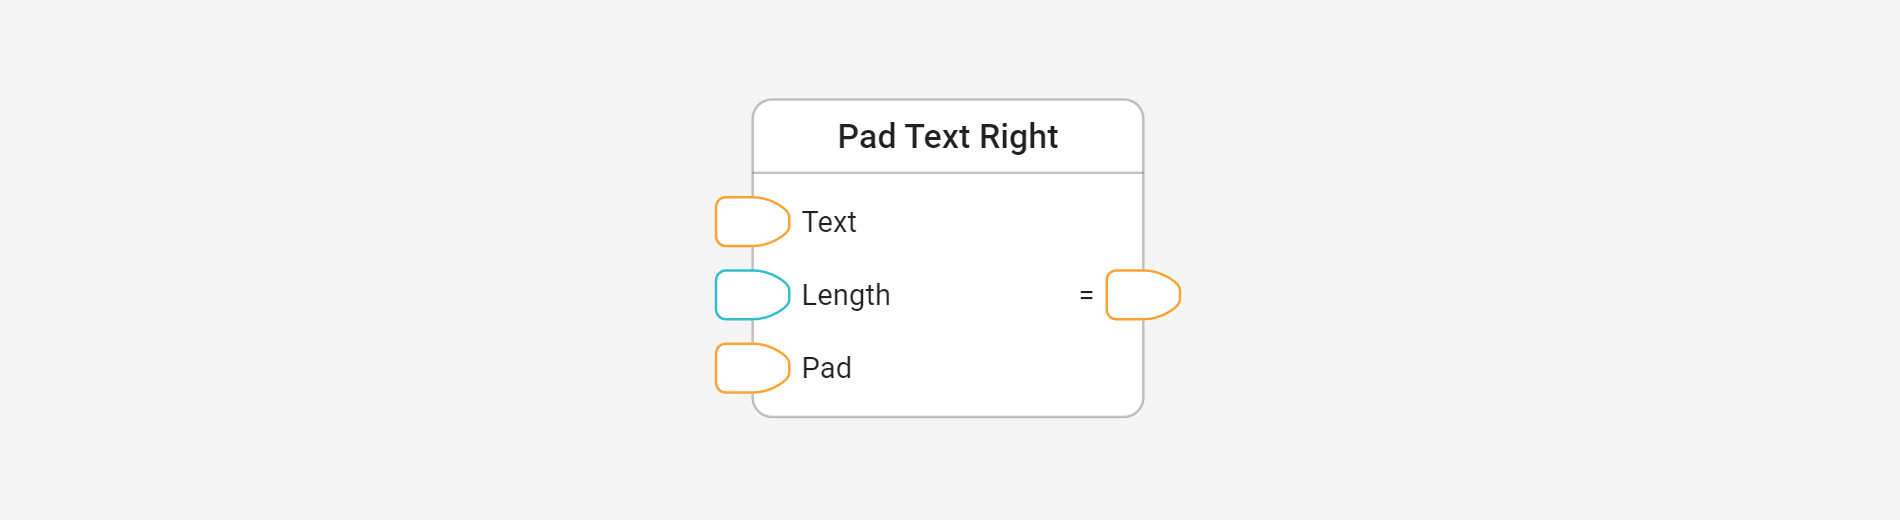 Pad a text right in Centrldesk